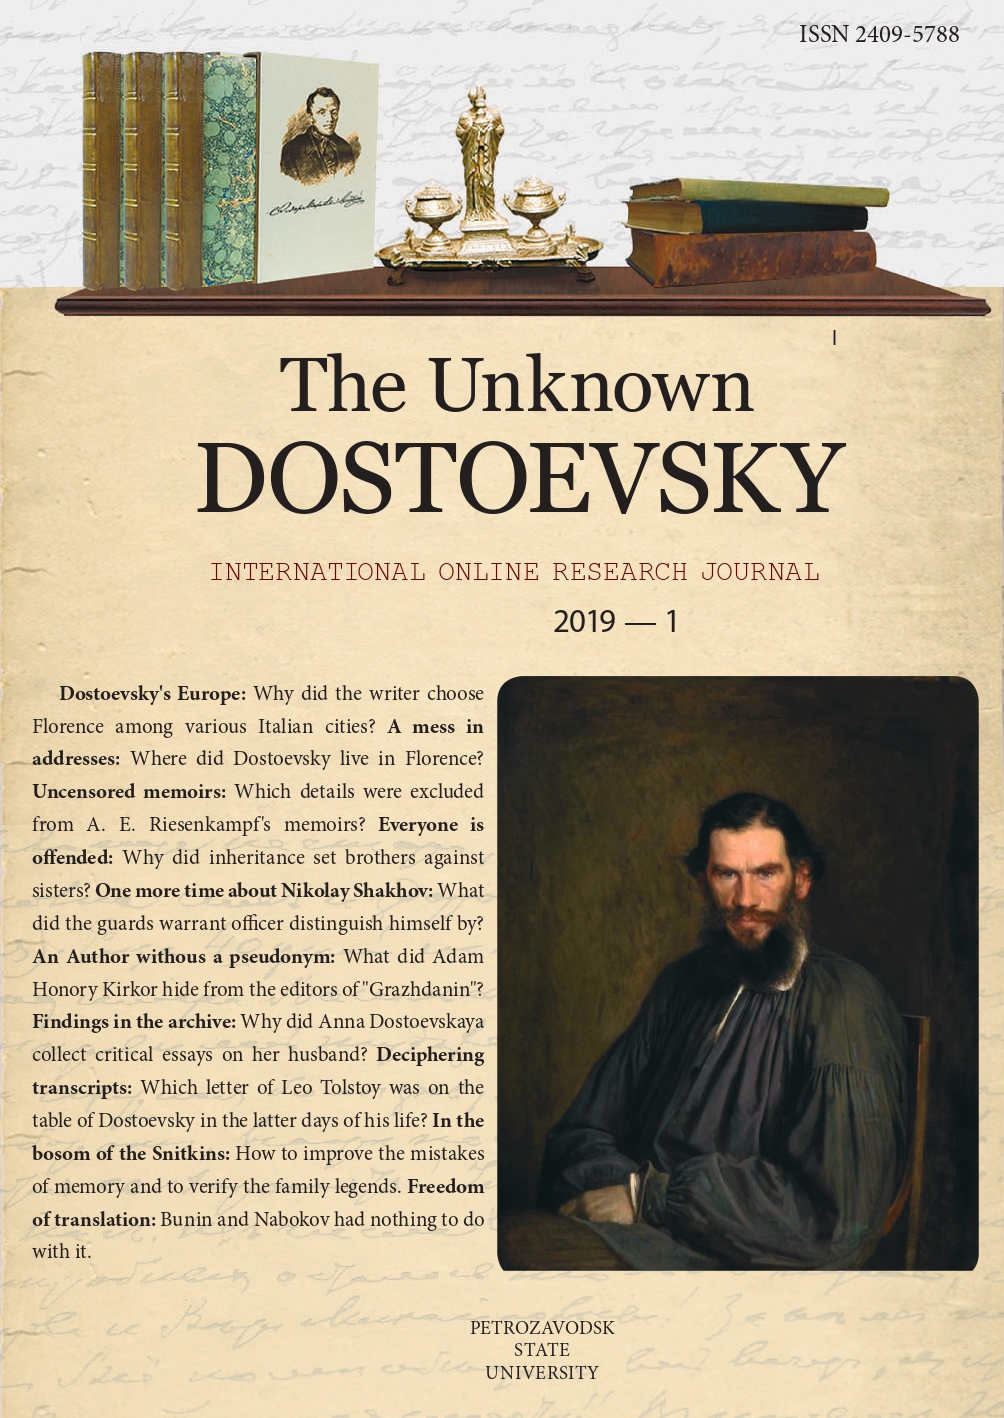 The Snitkins Who Became Relatives of Dostoevsky Cover Image